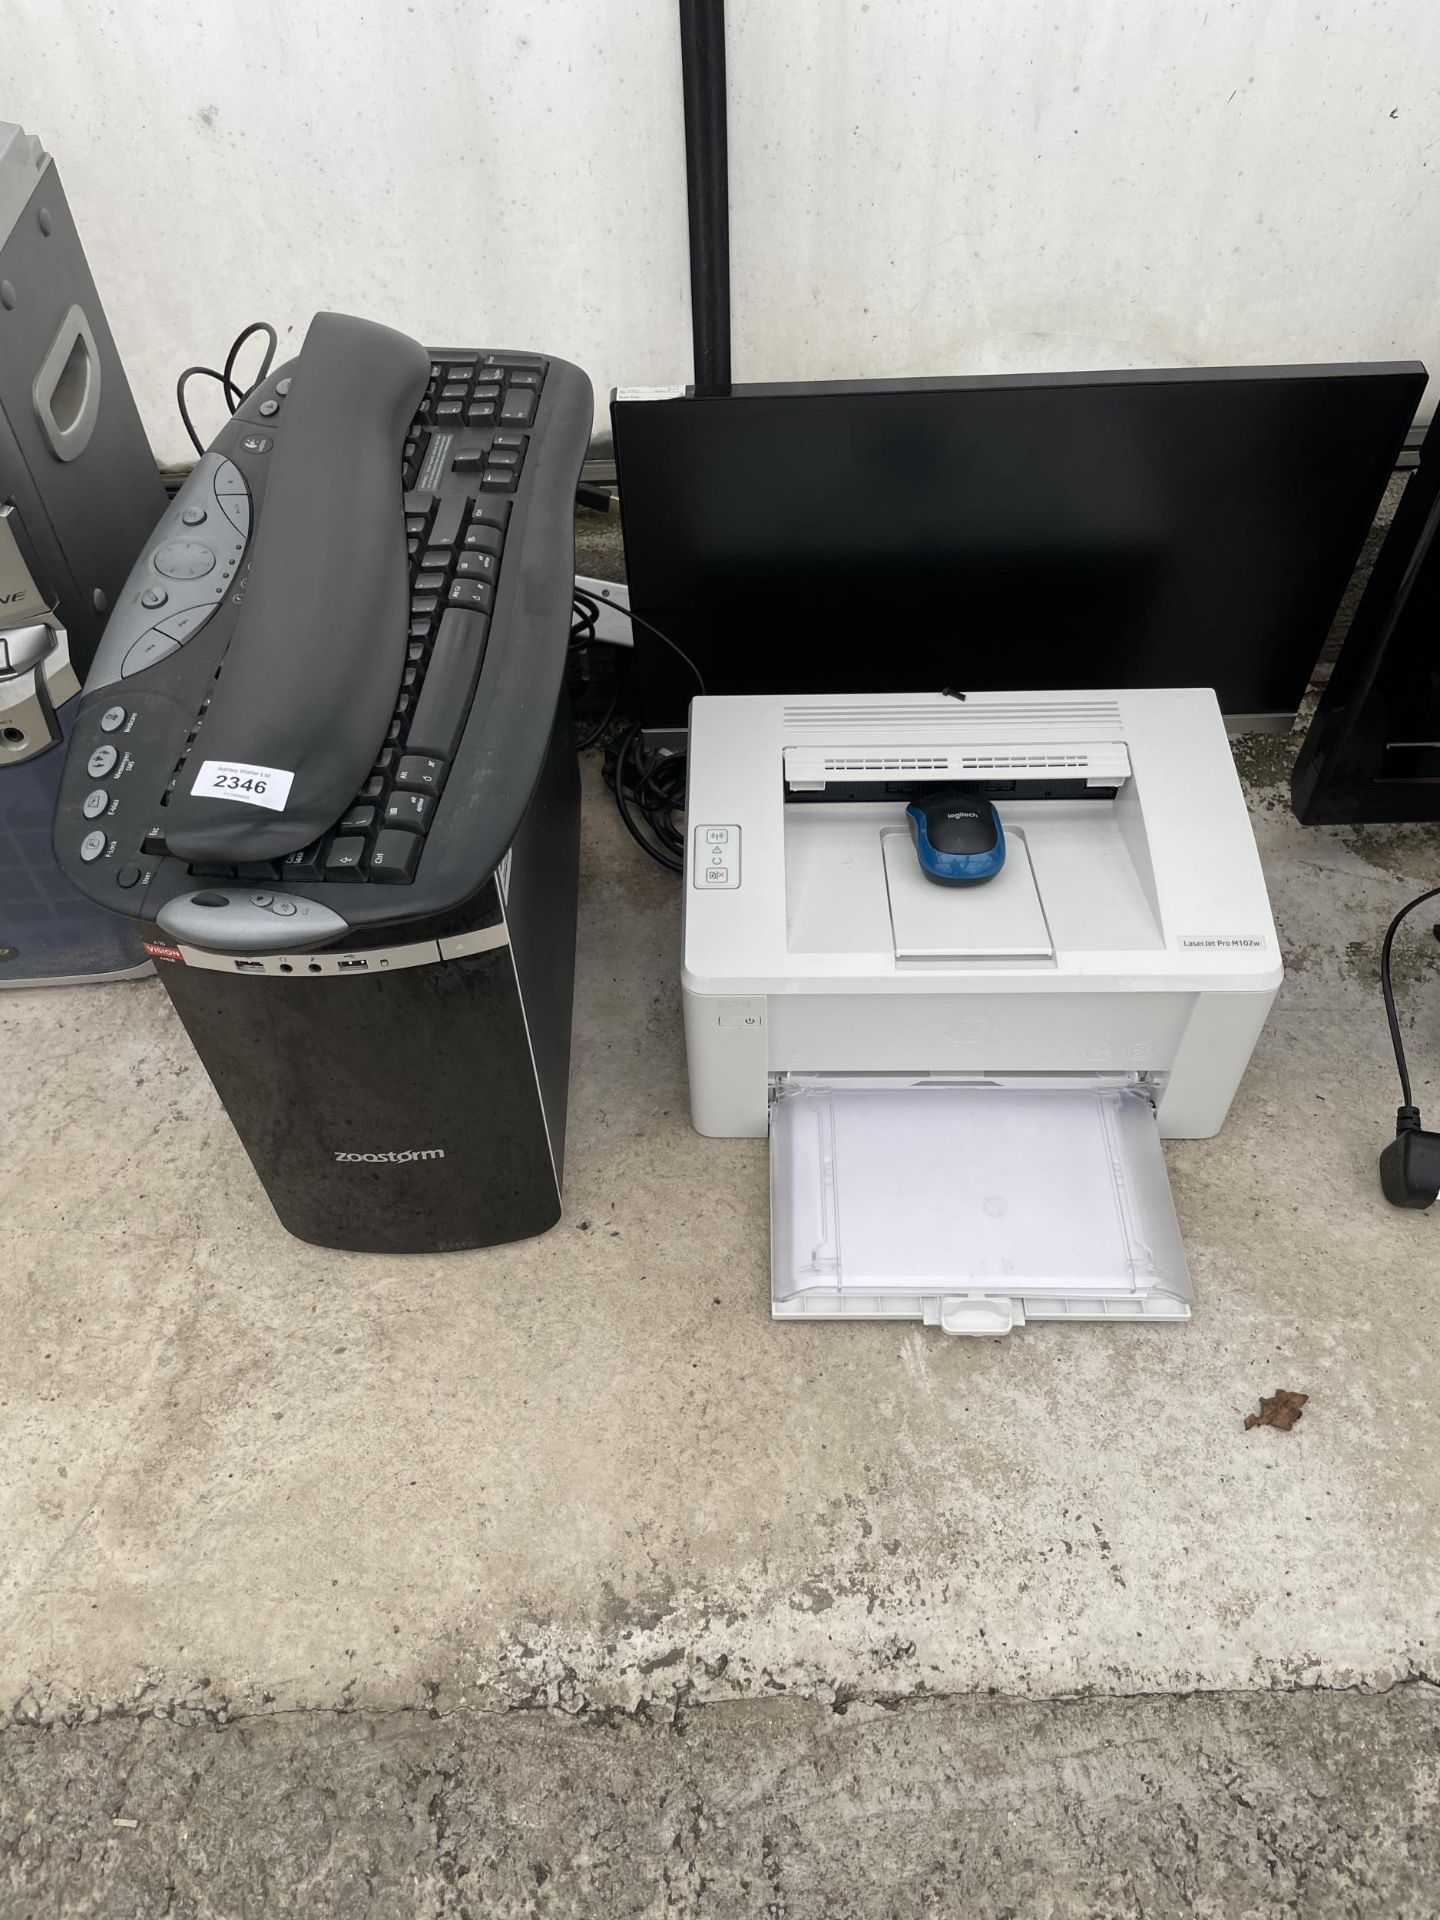 AN ASSORTMENT OF ITEMS TO INCLUDE A LASERJET PRINTER, A COMPUTER MONITER AND A ZOOSTORM COMPUTER